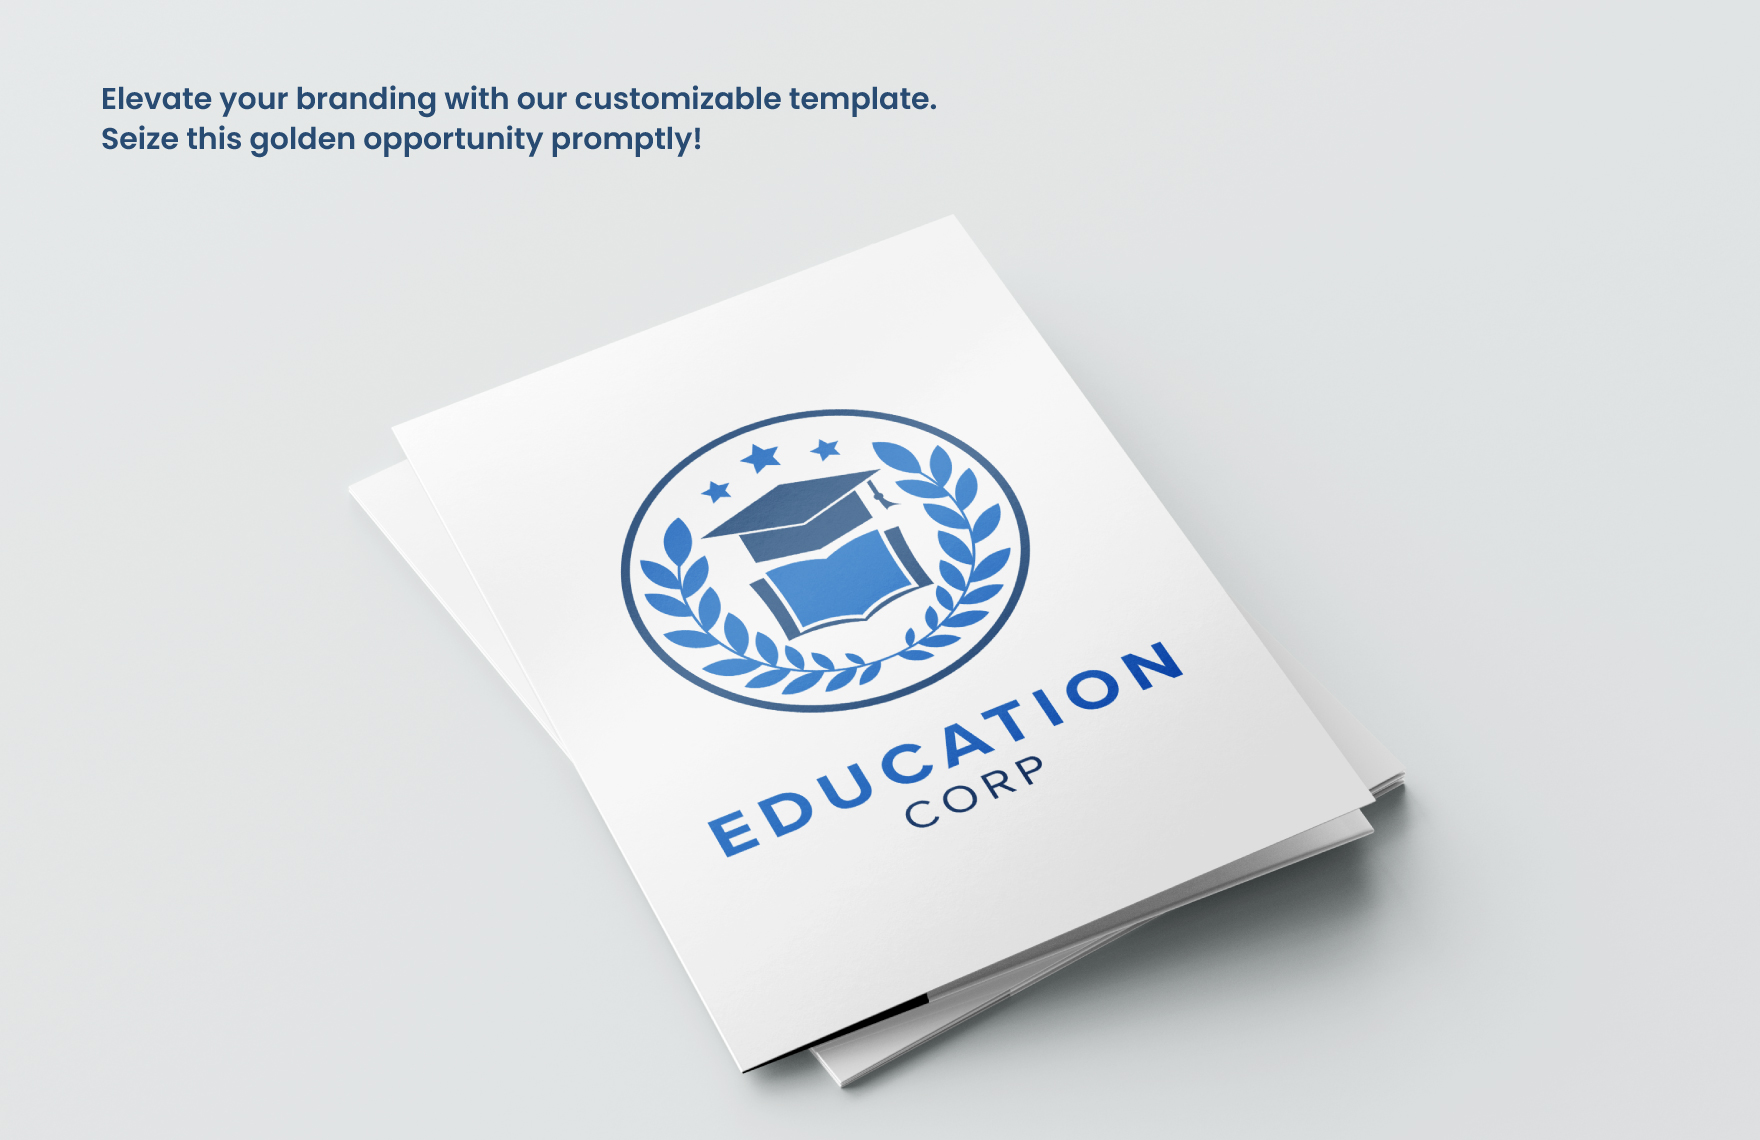 College Education Logo Template